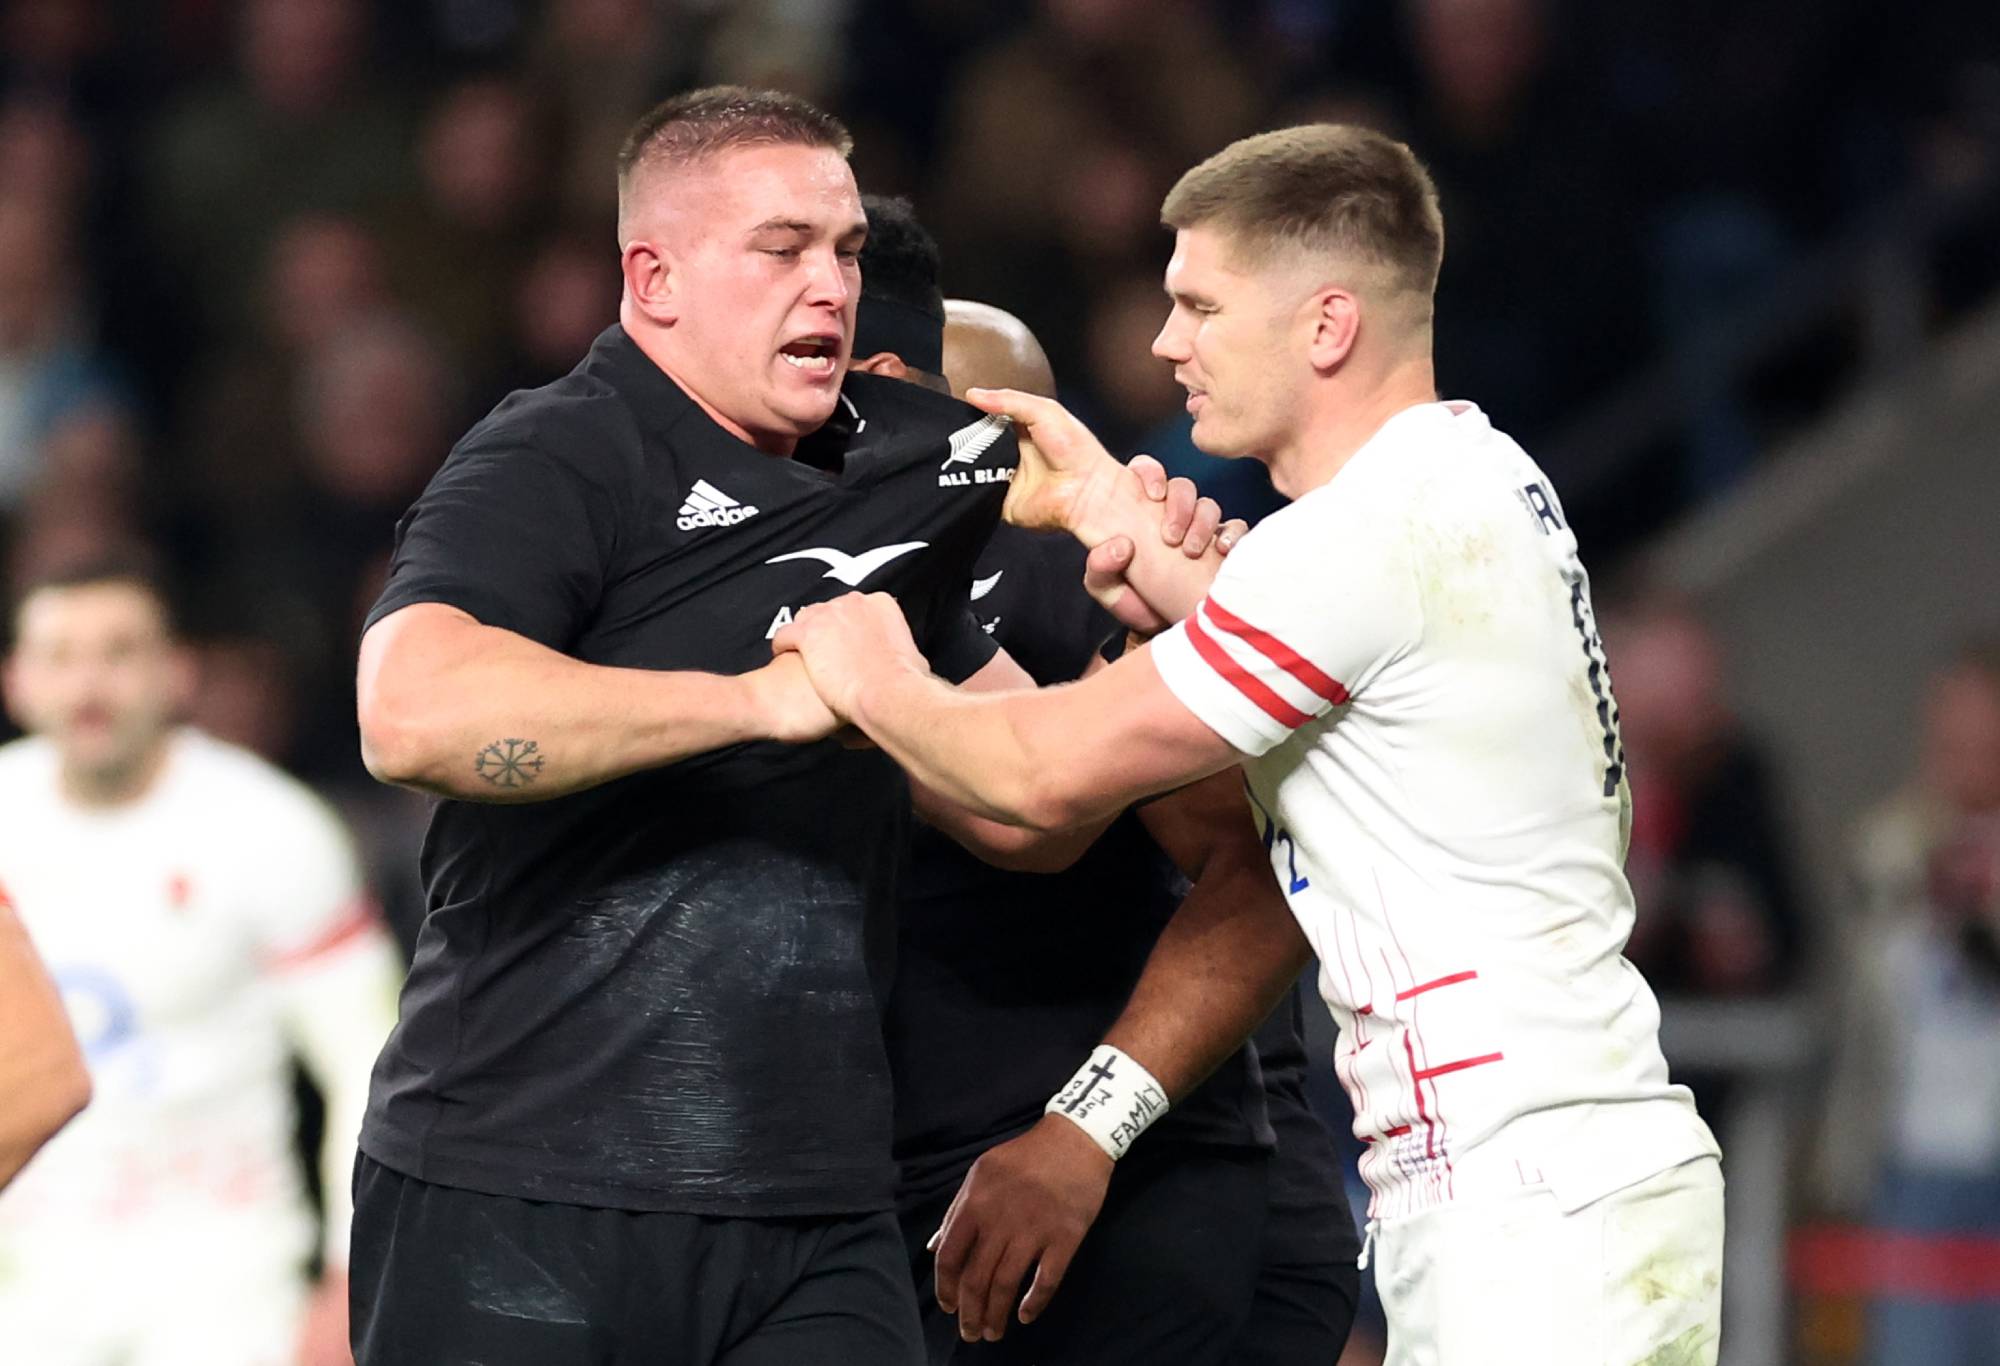 Owen Farrell of England interacts with Ethan de Groot of New Zealand during the Autumn International match between England and New Zealand at Twickenham Stadium on November 19, 2022 in London, England. (Photo by Warren Little/Getty Images)